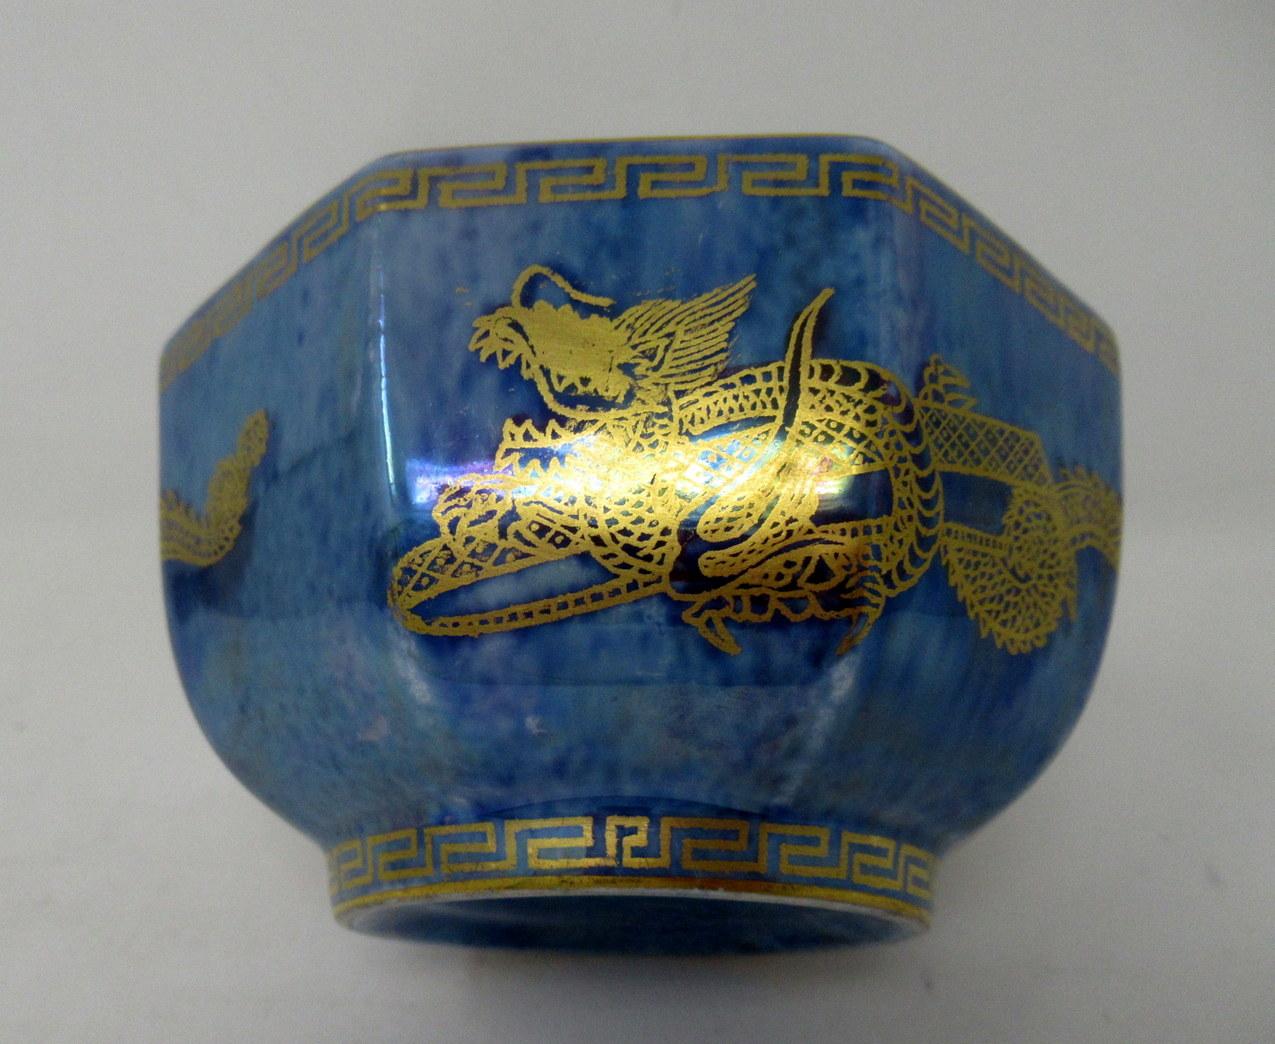 20th Century Art Deco Wedgwood Celestial Chinese Dragon Lustre Ware Bowl Centerpiece, 1920s  